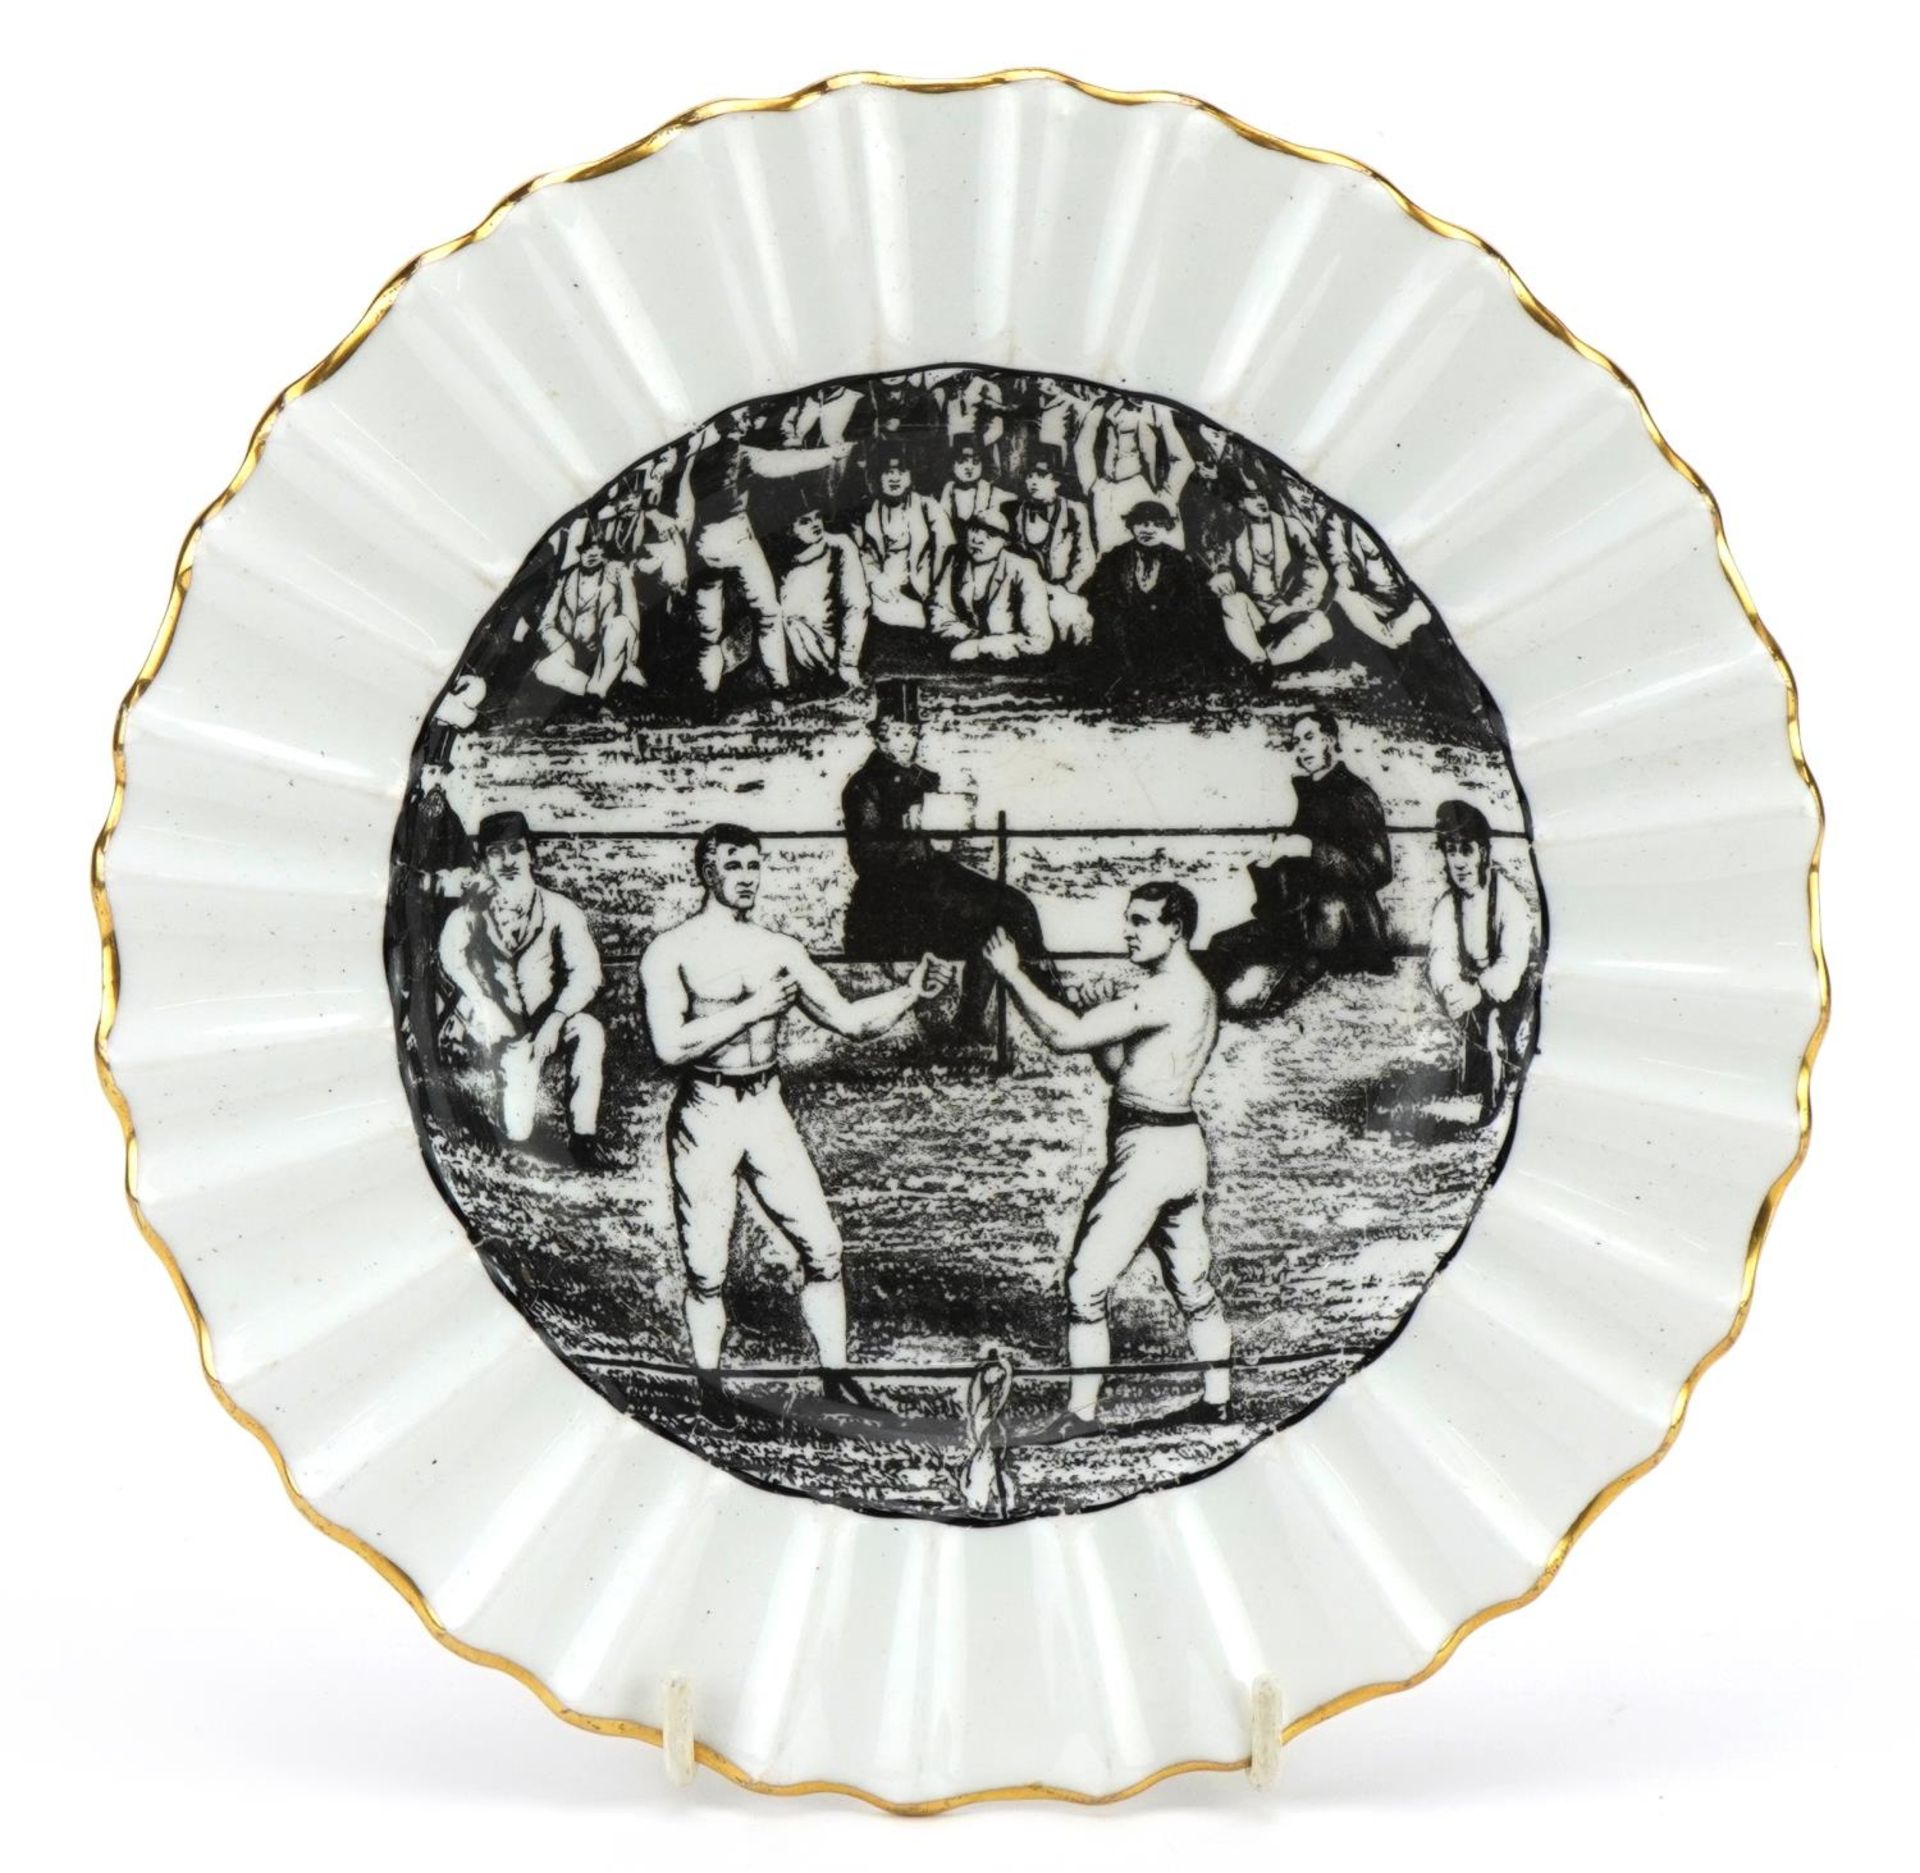 Crown Staffordshire porcelain plate, The Great Contest Between Sayers and Heenan 1860 Queensbury,